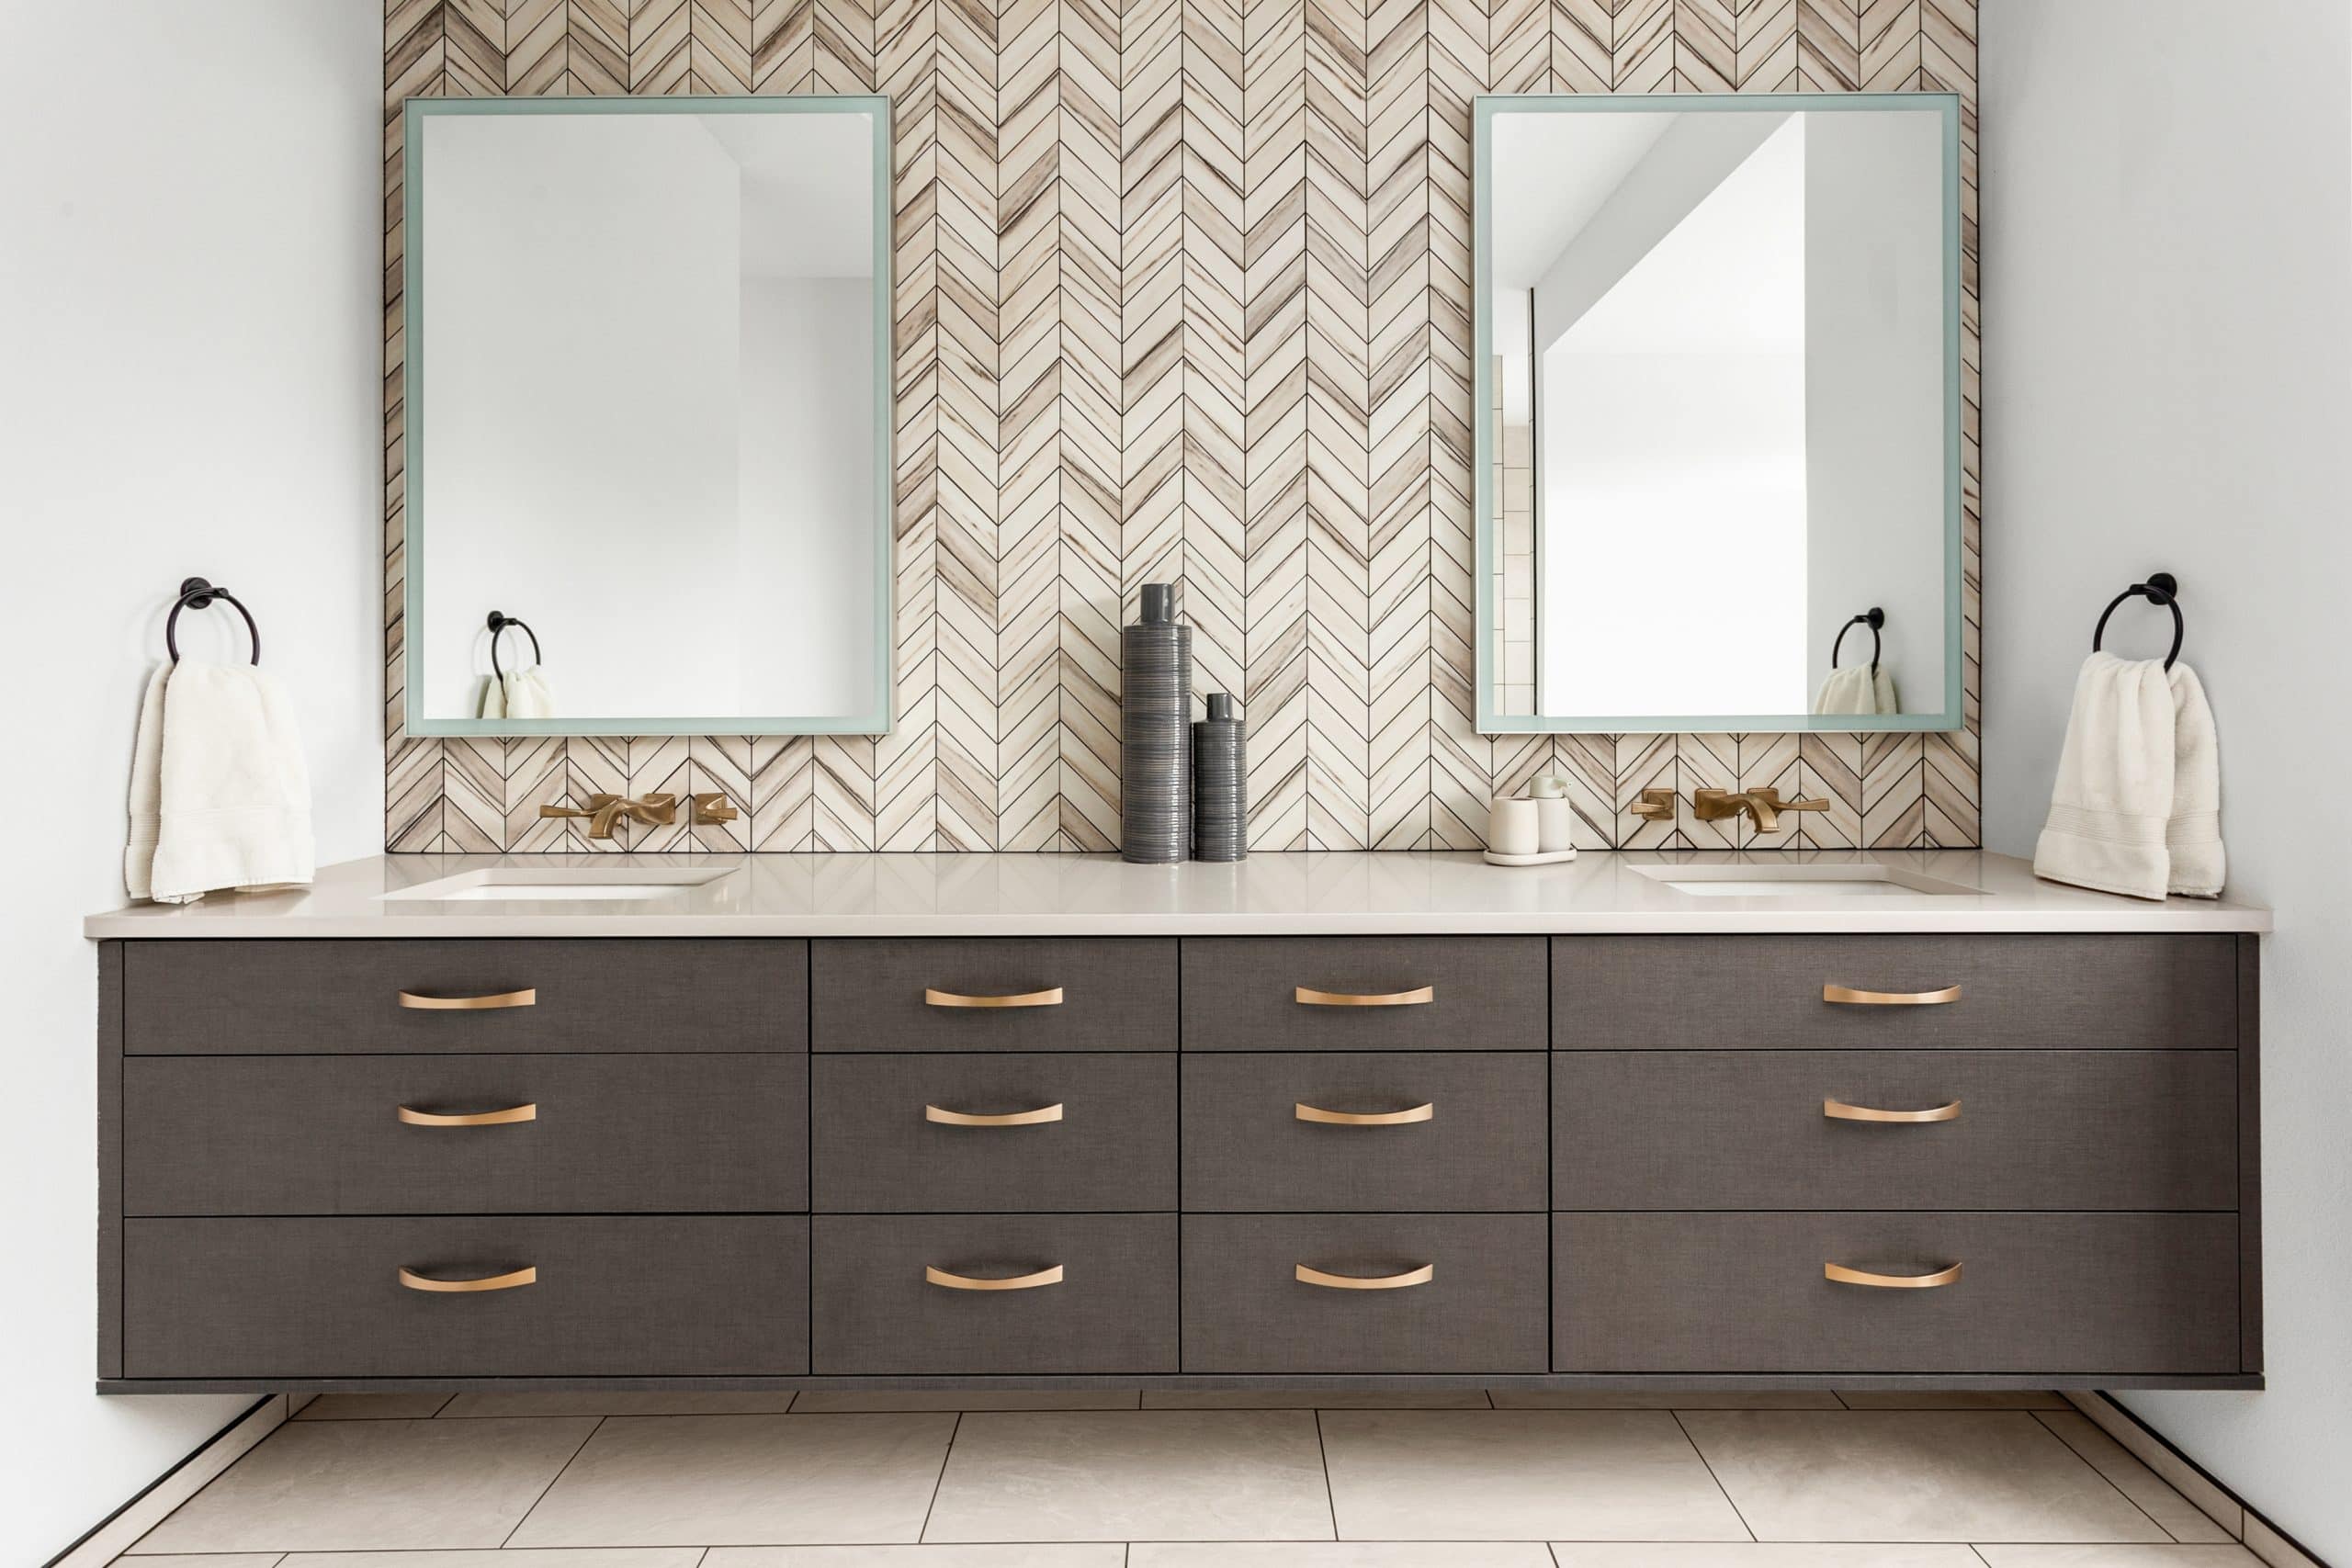 Bathroom in luxury home with double vanity. Features herringbone tile backsplash, quartz countertops, undermount sinks, and floating faucets and cabinets.